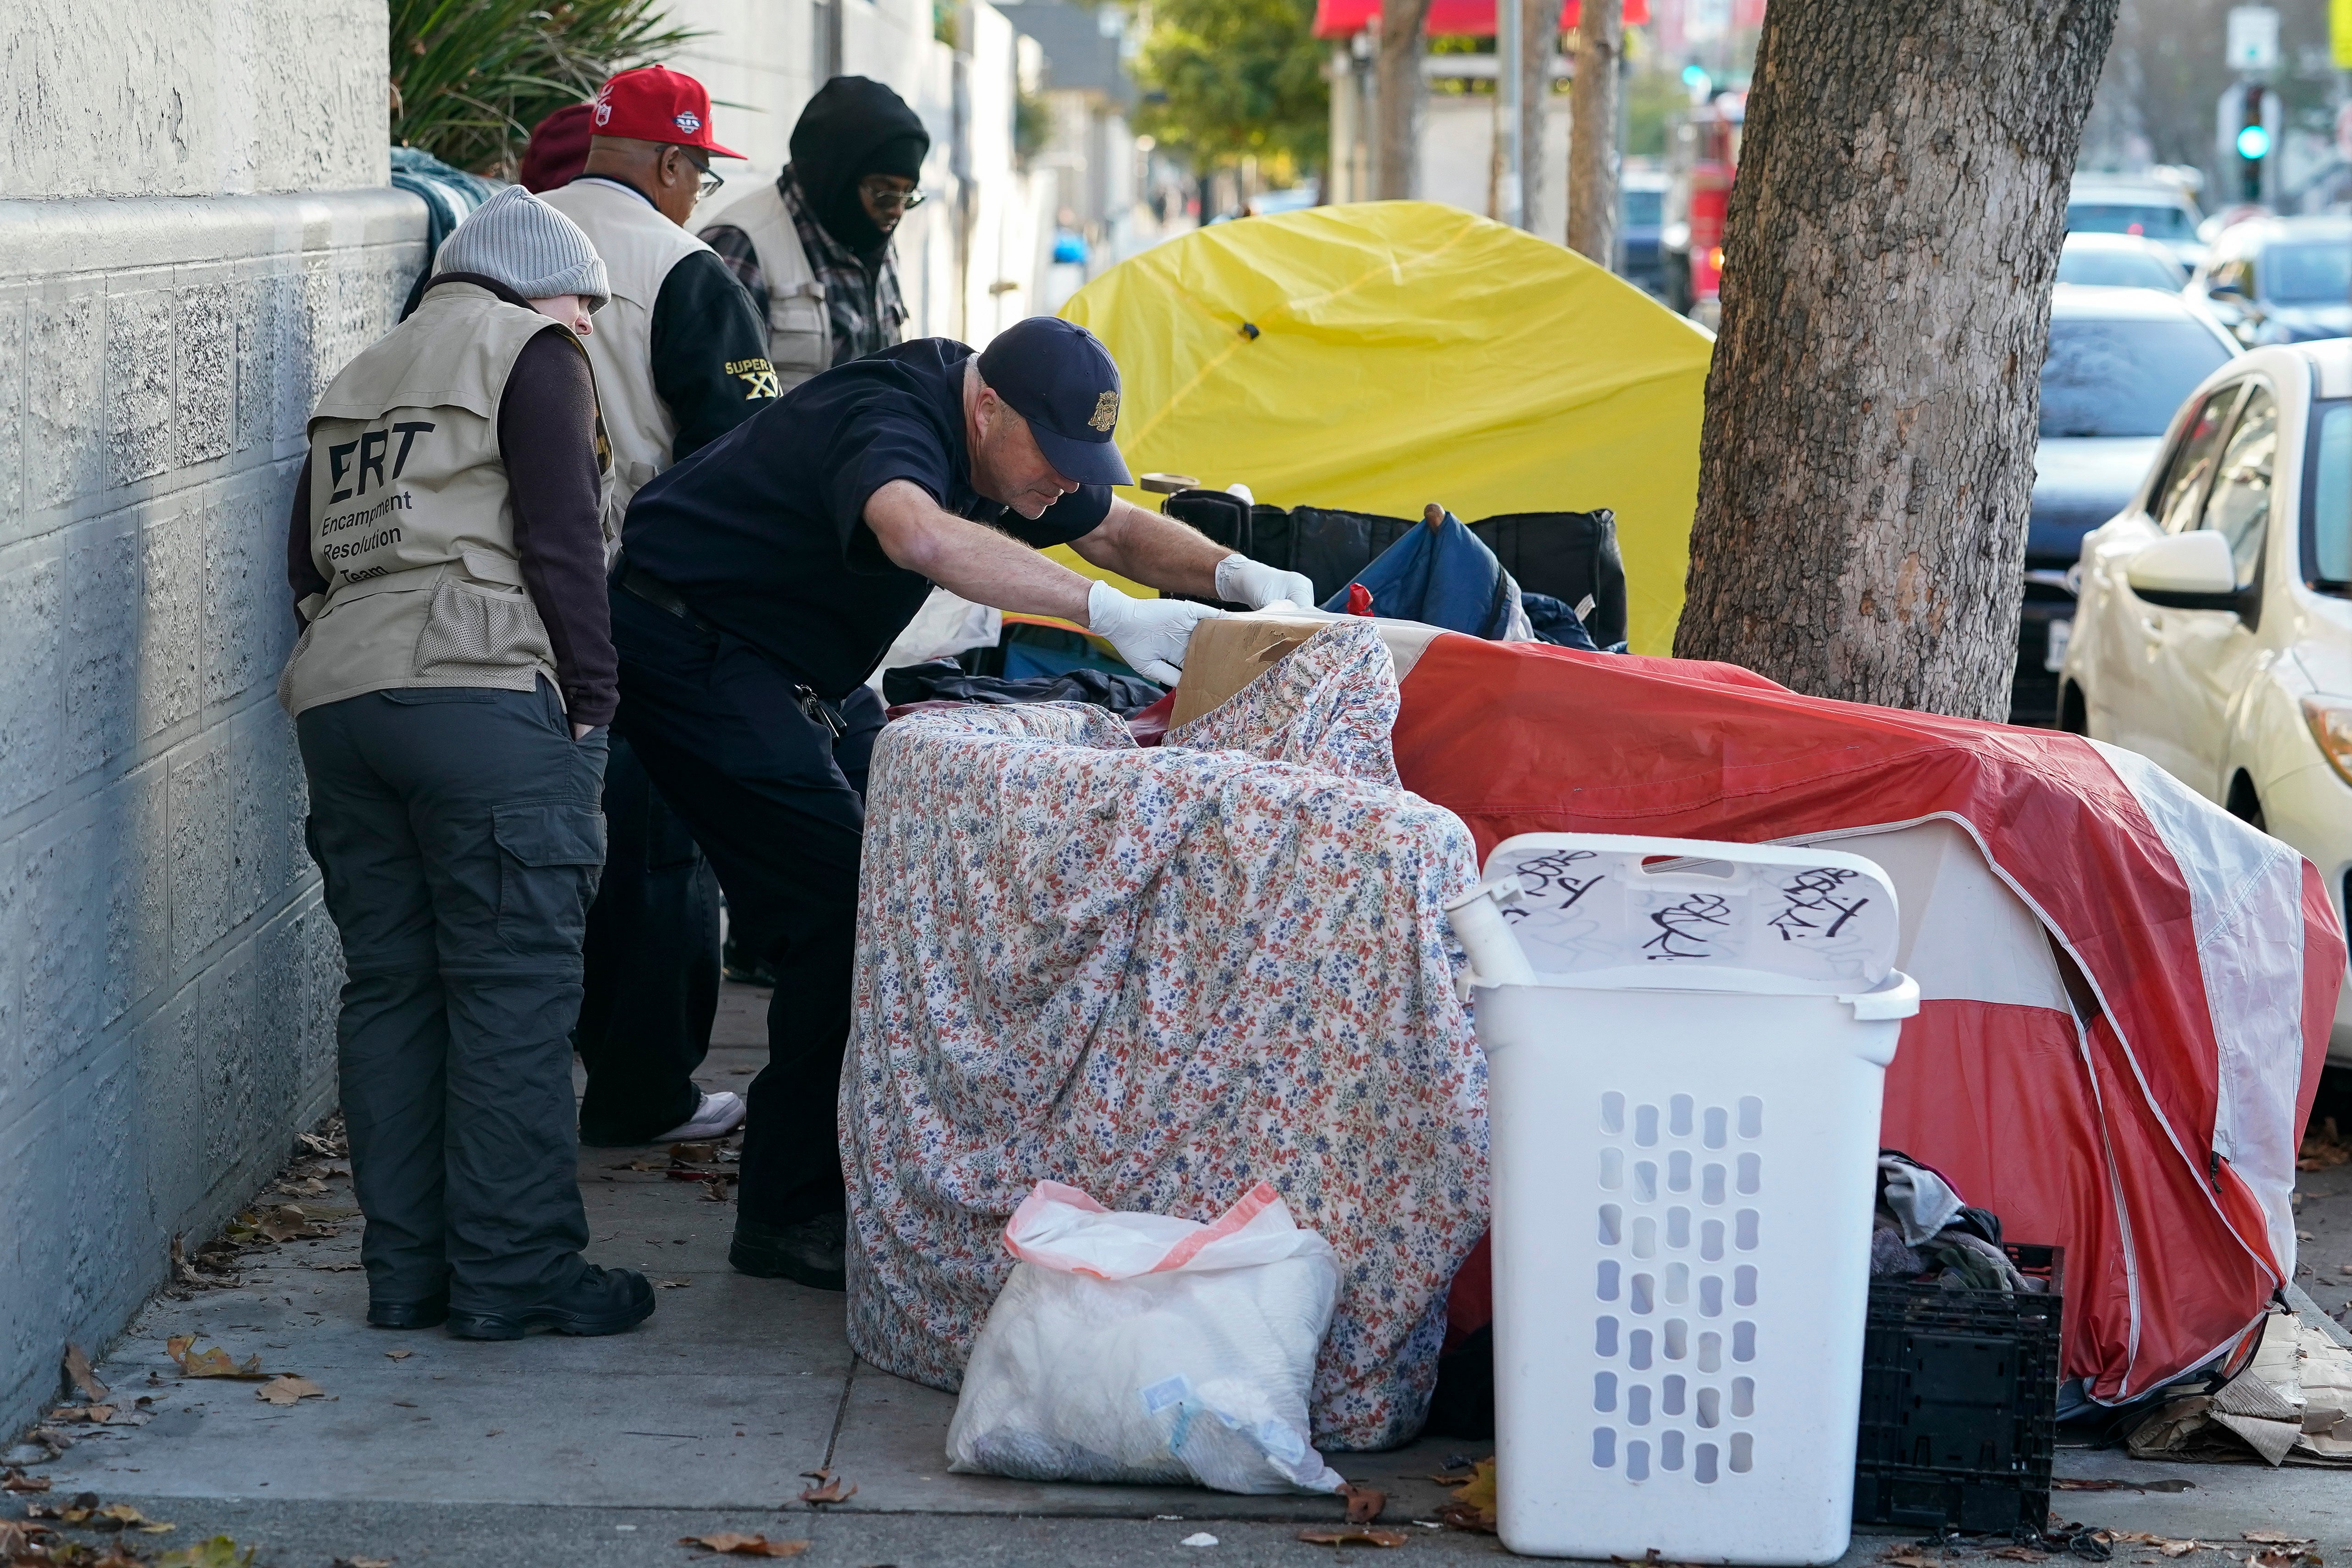 Members of the San Francisco Homeless Outreach Team’s Encampment Resolution Team speak to with homeless people in San Francisco in 2022 (file)